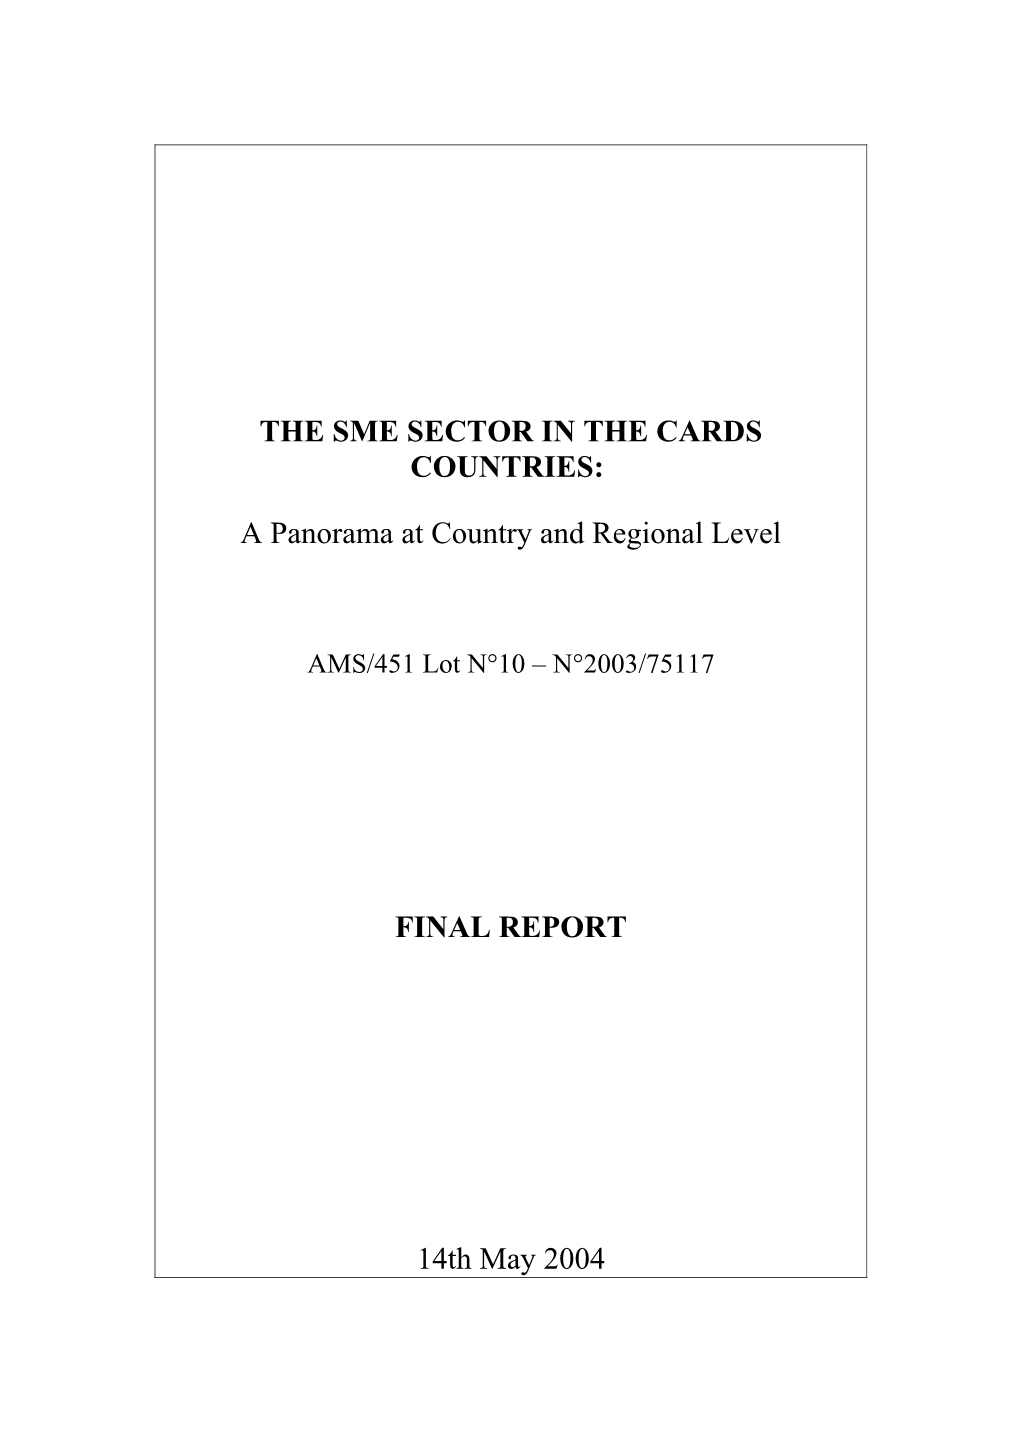 The SME Sector in the CARDS Countries: a Panorama at Country and Regional Level